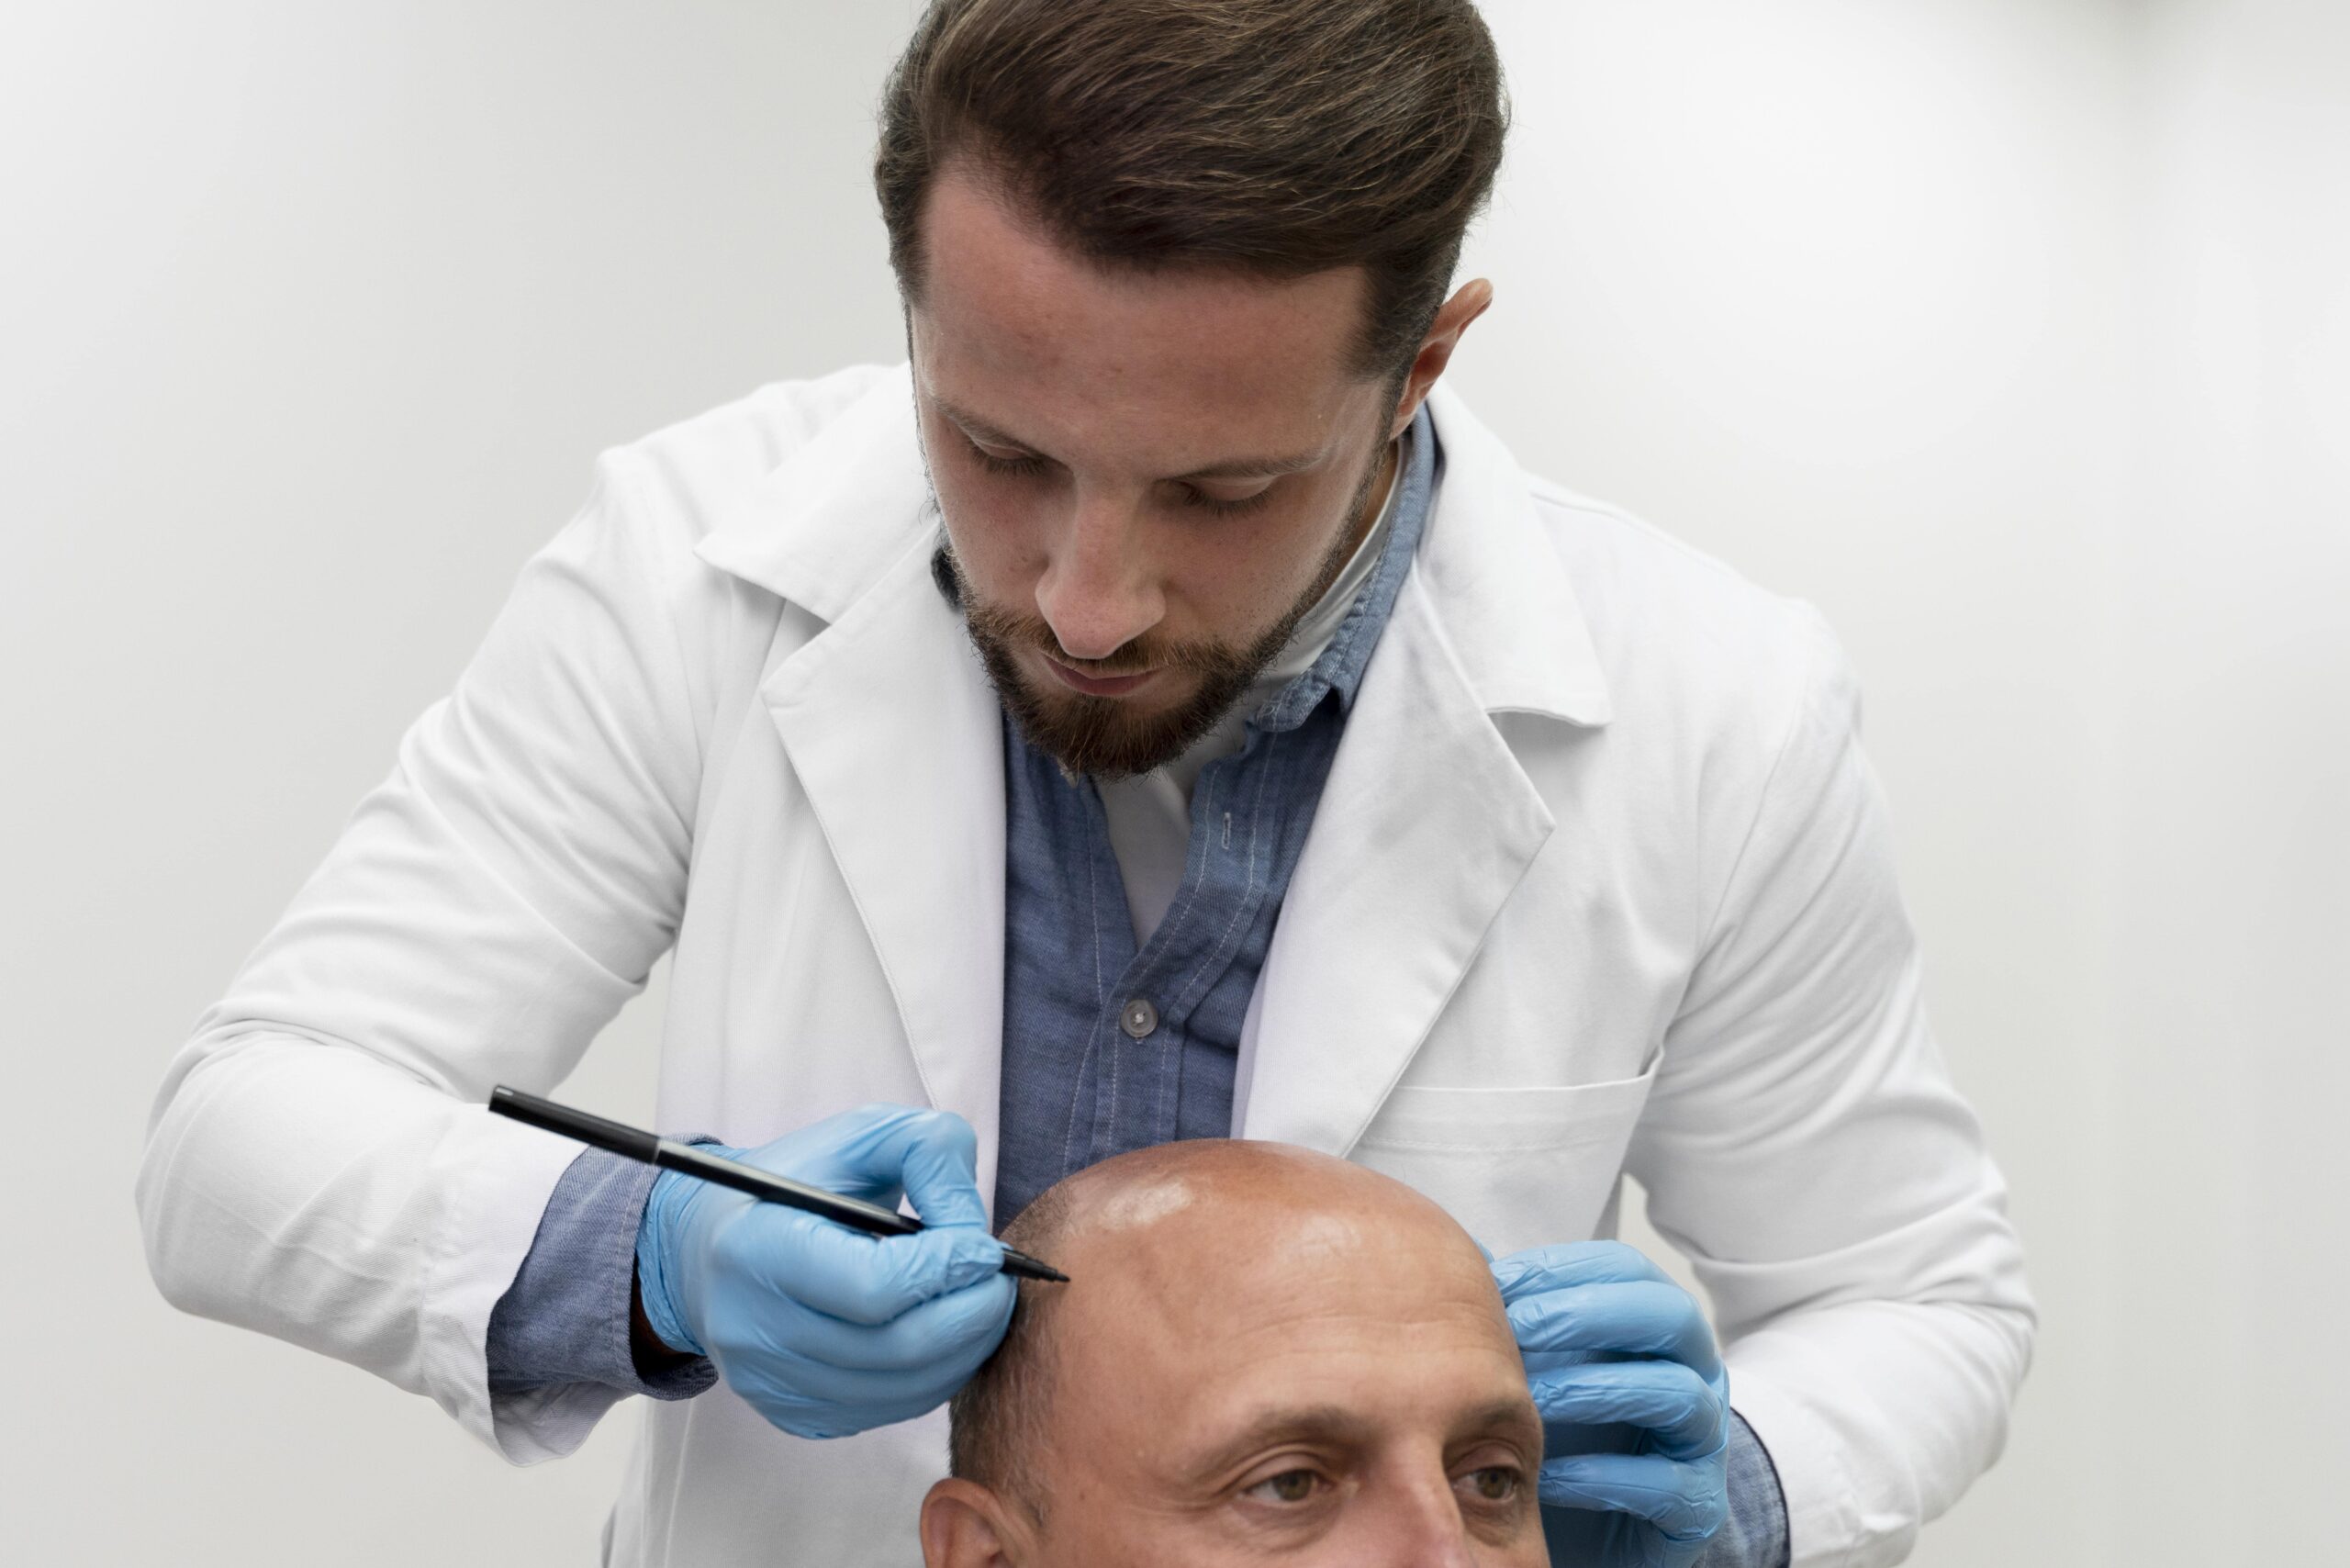 How Does Hair Transplant Before and After Process Work?